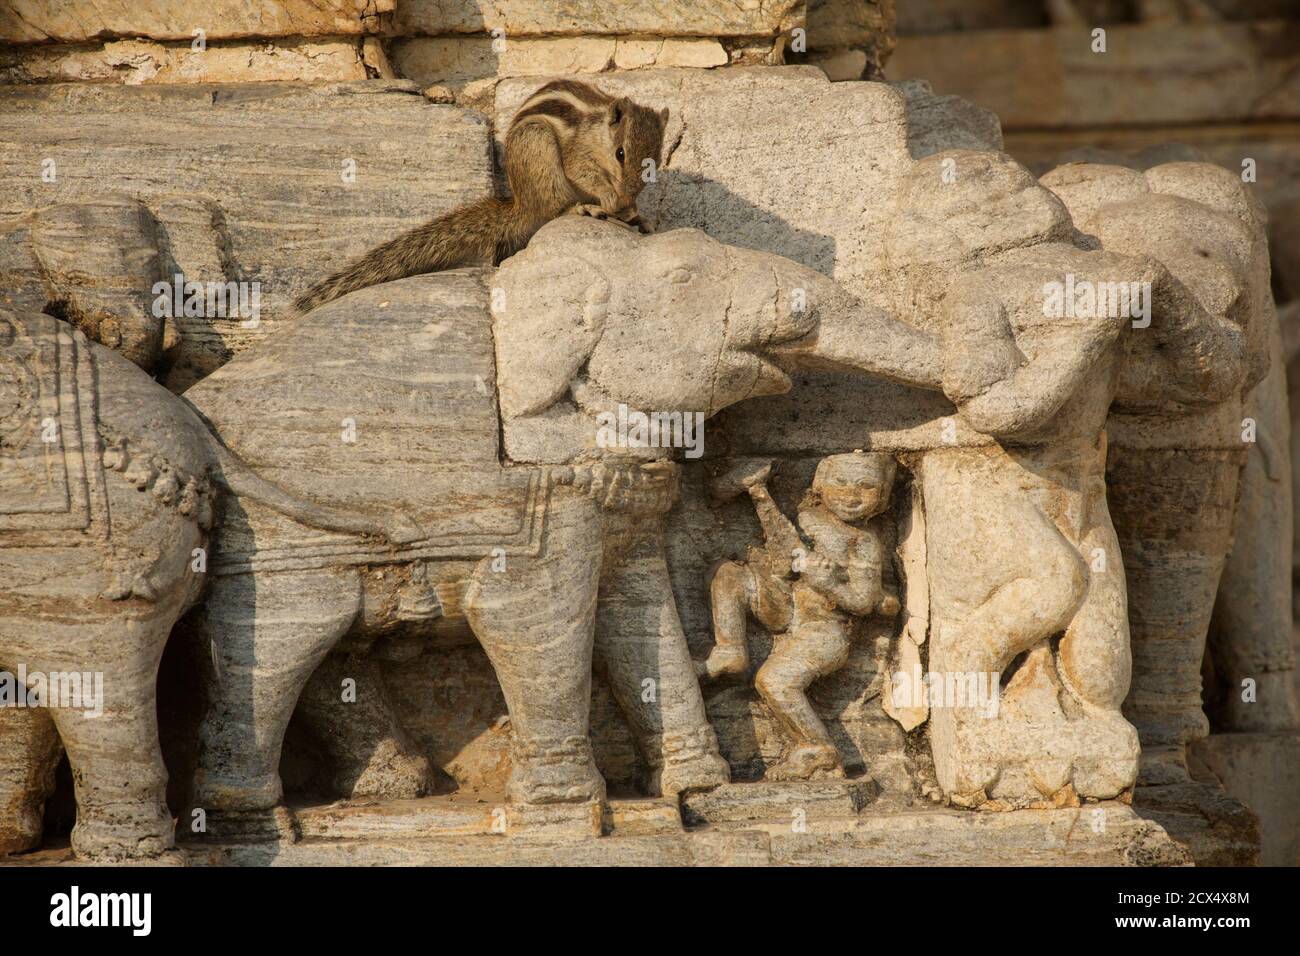 Squirrel crawling across ornate stone carving of elephants, Jagdish Temple, Udaipur, Rajasthan, India Stock Photo